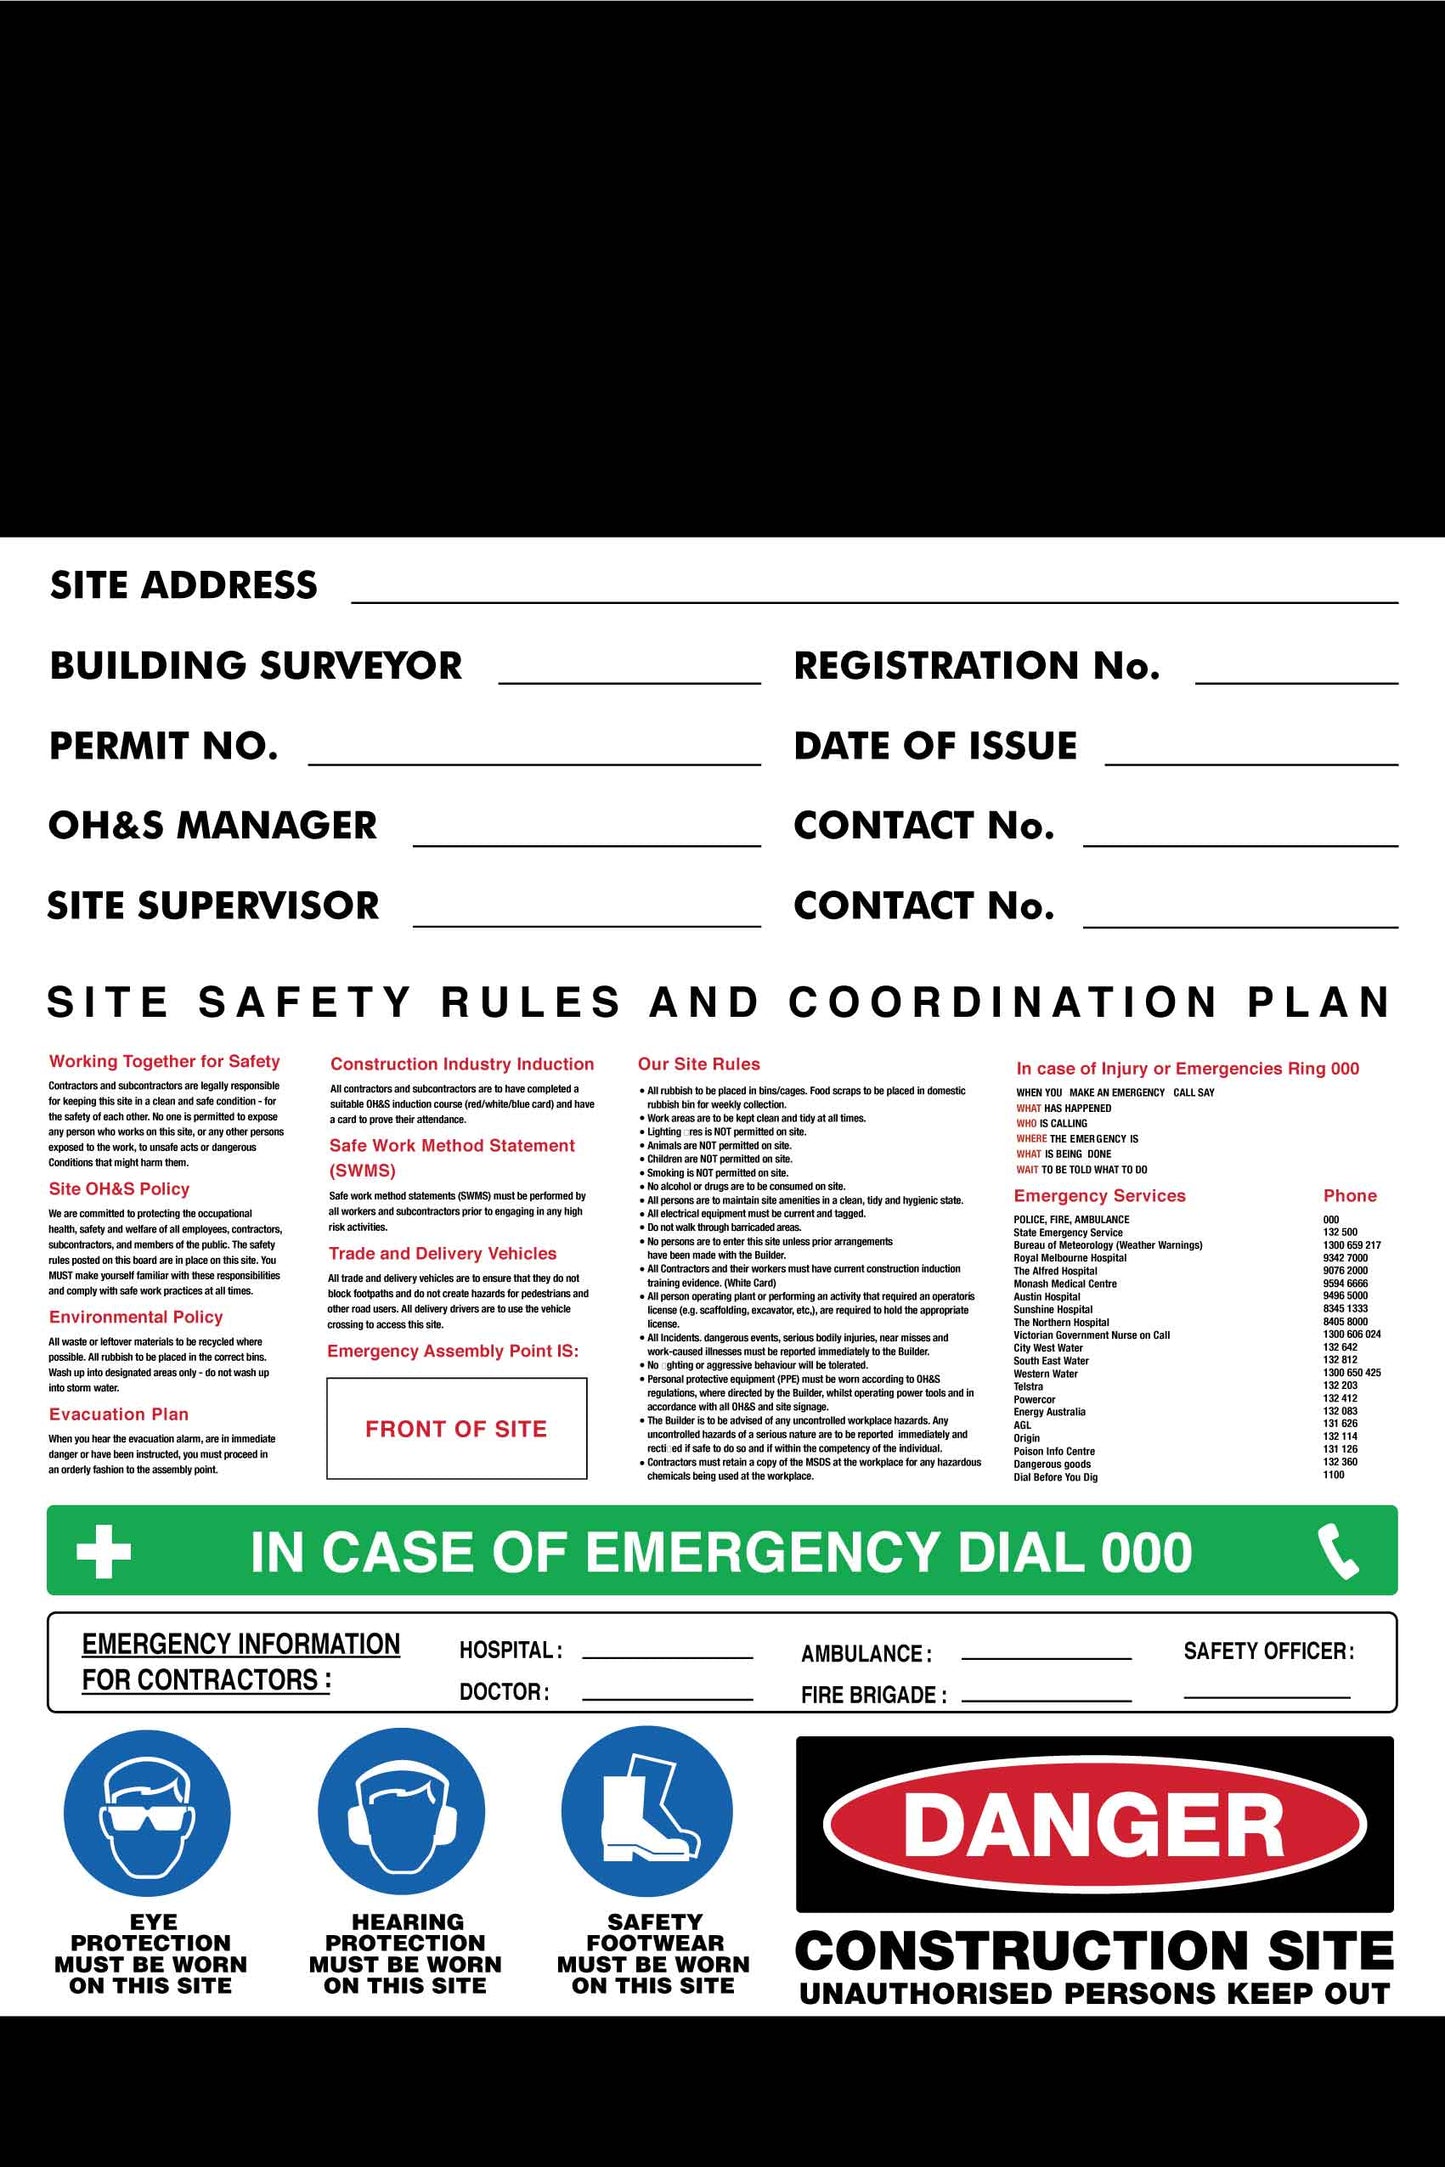 Construction Site Entry Safety Rules And Co-Ordination Plan Sign